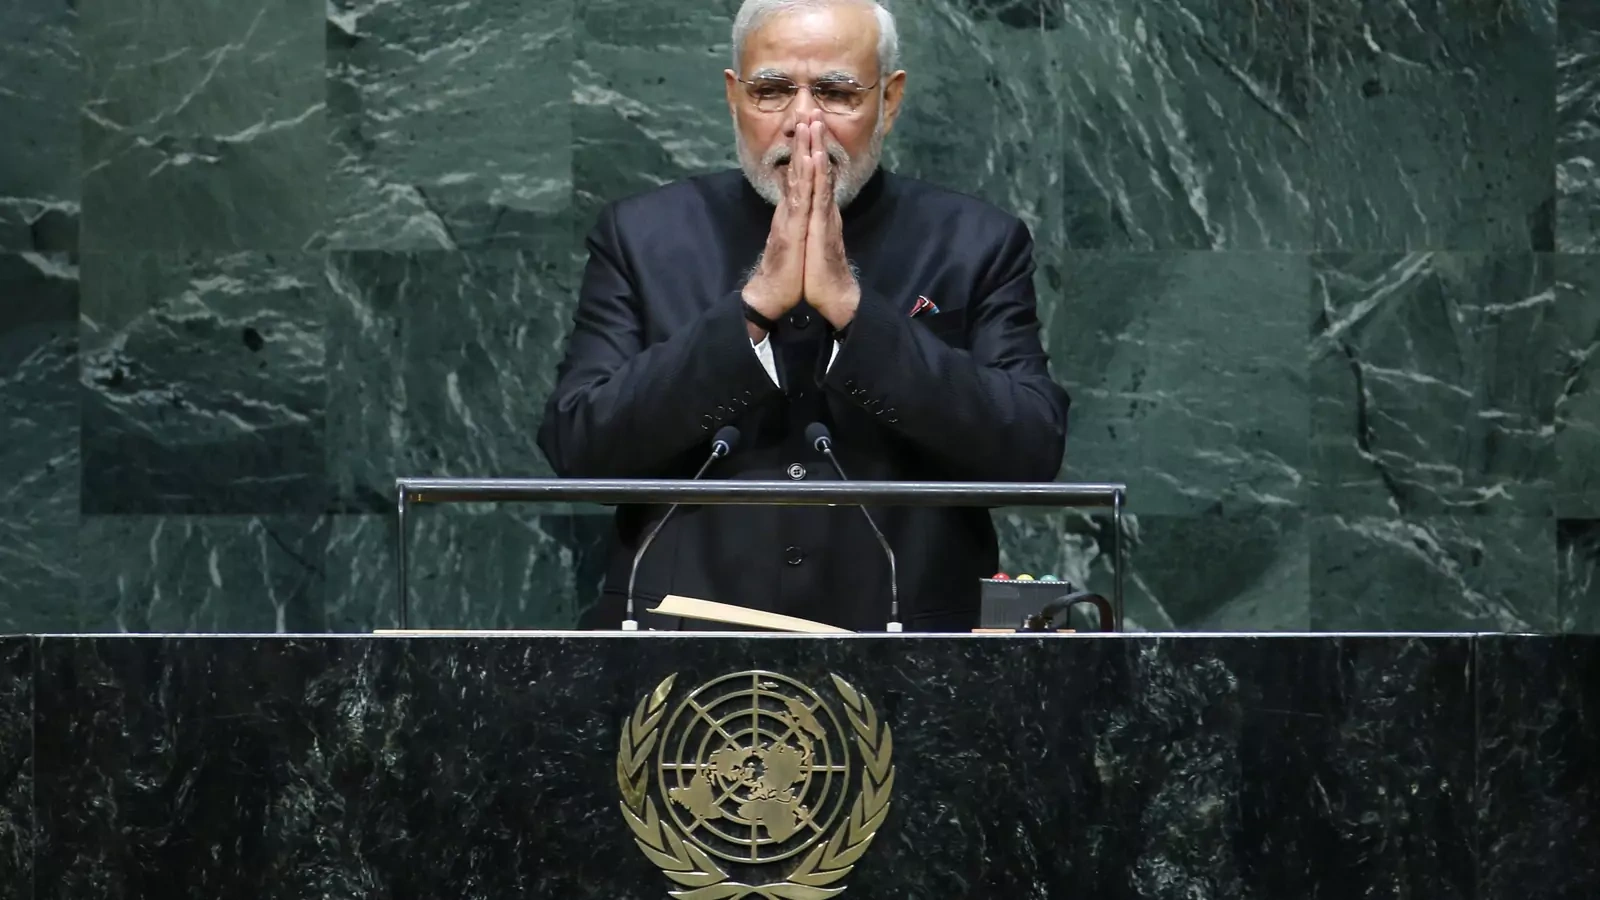 Prime Minister Narendra Modi Addressing the United Nations General Assembly in 2014